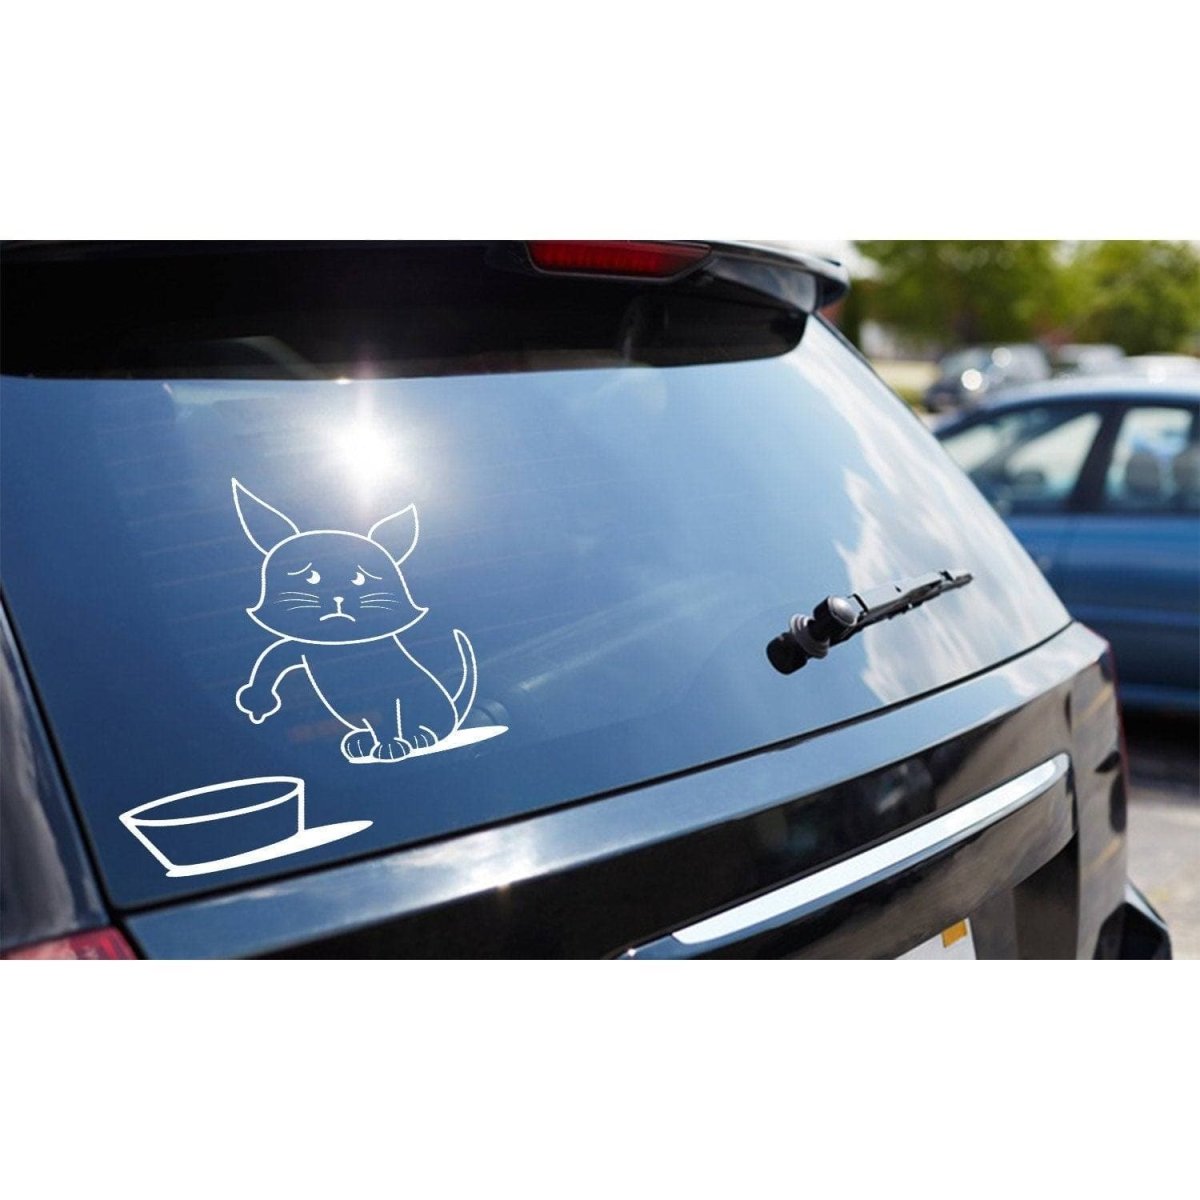 Cartoon Cat Car Stickers Waterproof Removable Car Decal Stickers